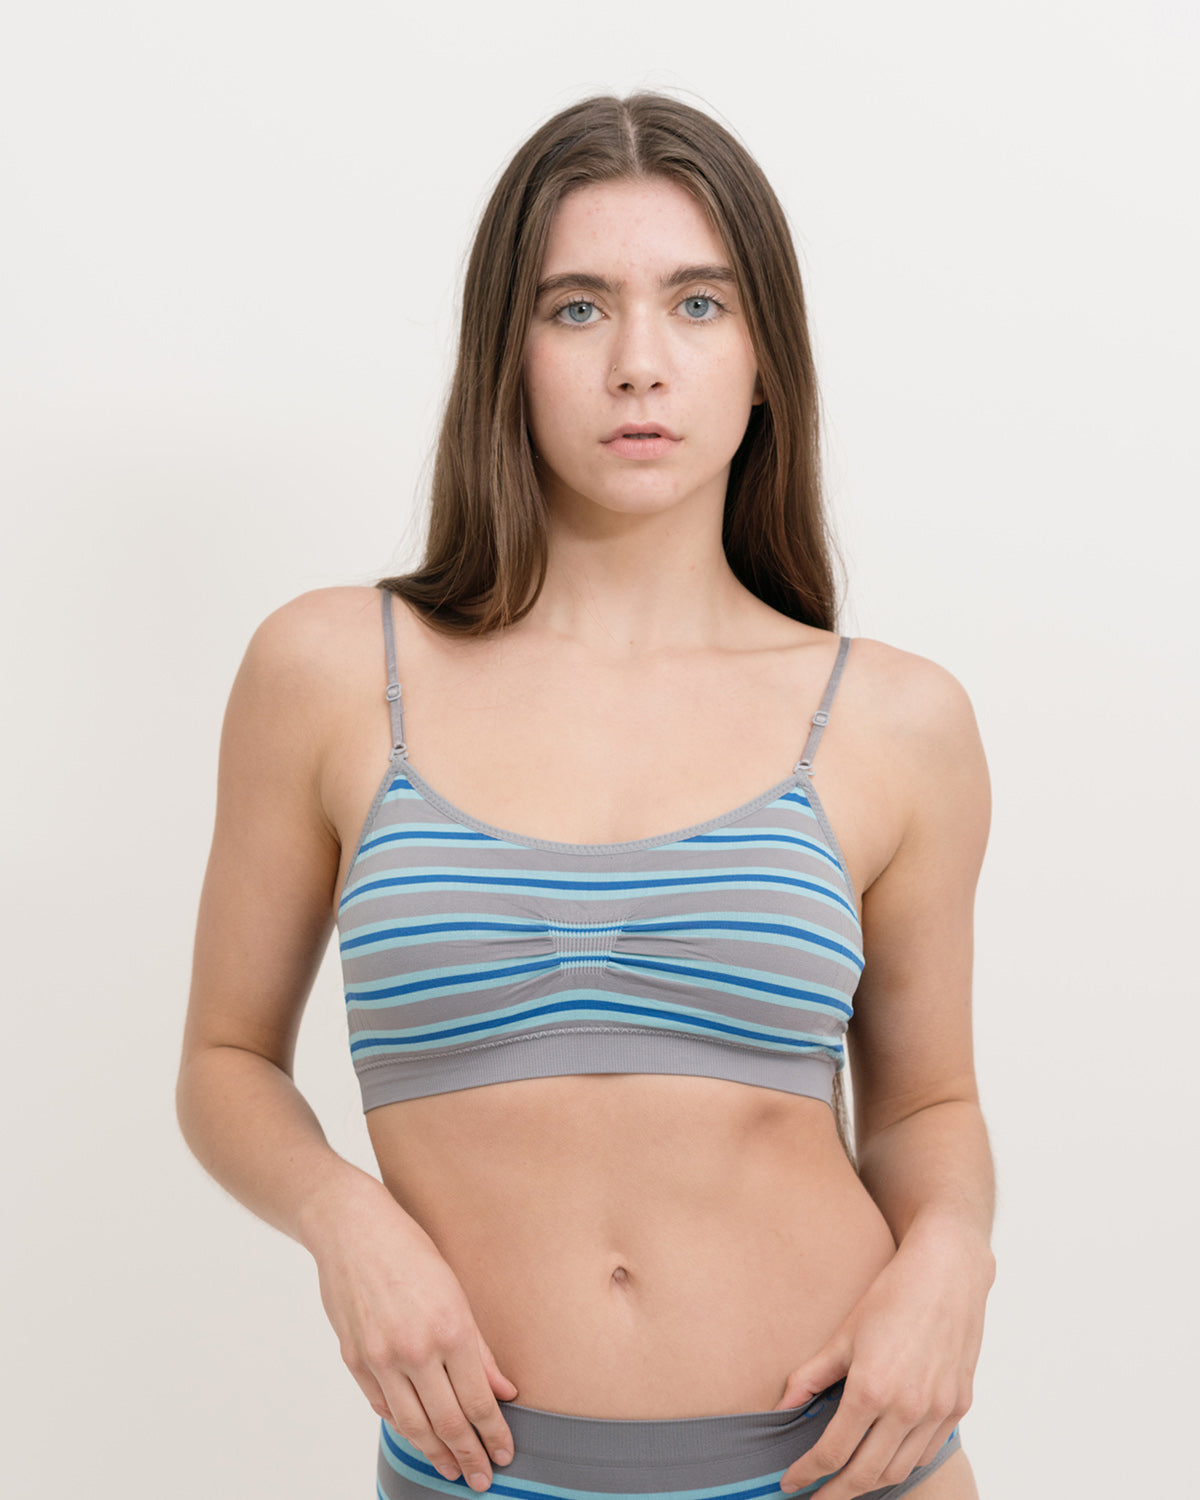 Coobie - The Perfect Bra For Women With Small Breasts • The Fashionable  Housewife